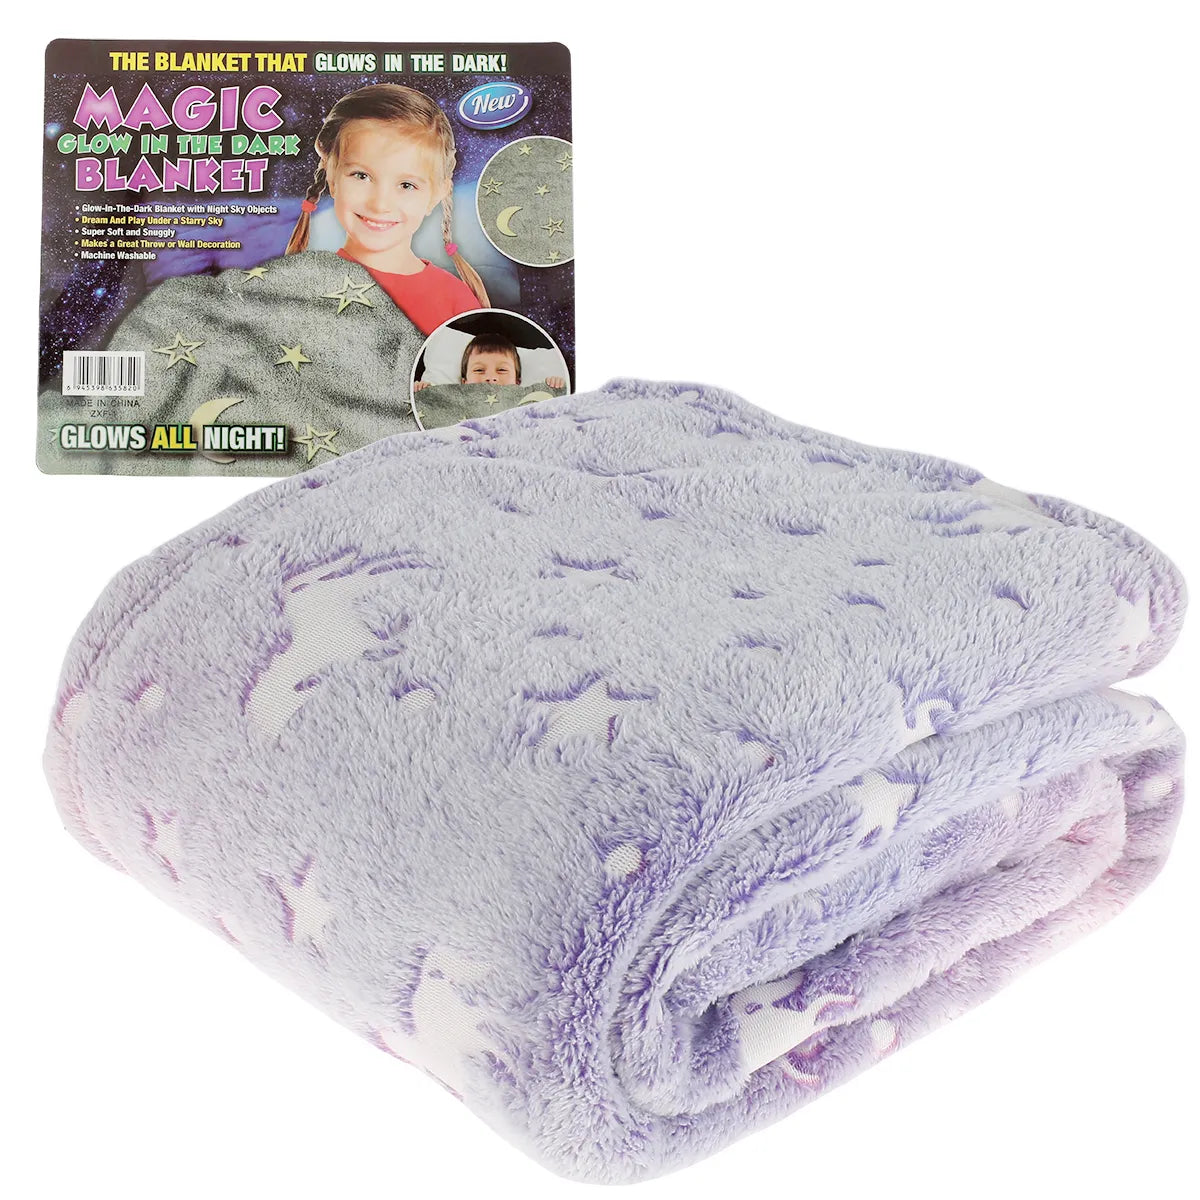 Steven Store™ Dark Unicorn Blanket: Ultra-soft and stylish, featuring a dark unicorn design for cozy and magical comfort.